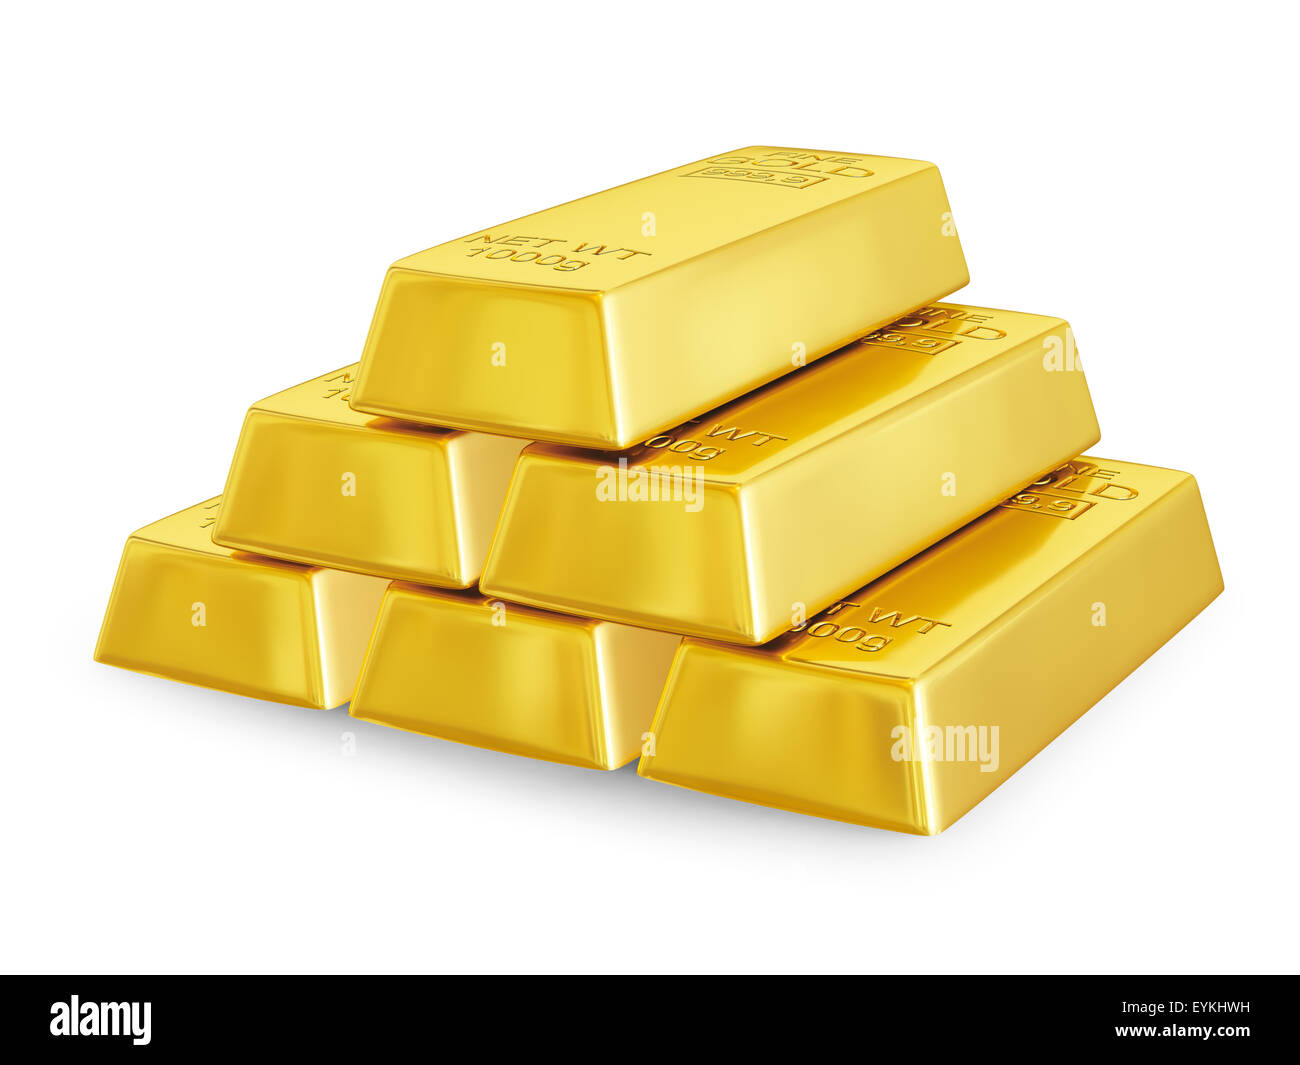 Gold bars bullions pyramid isolated wealth richness banking concept Stock Photo